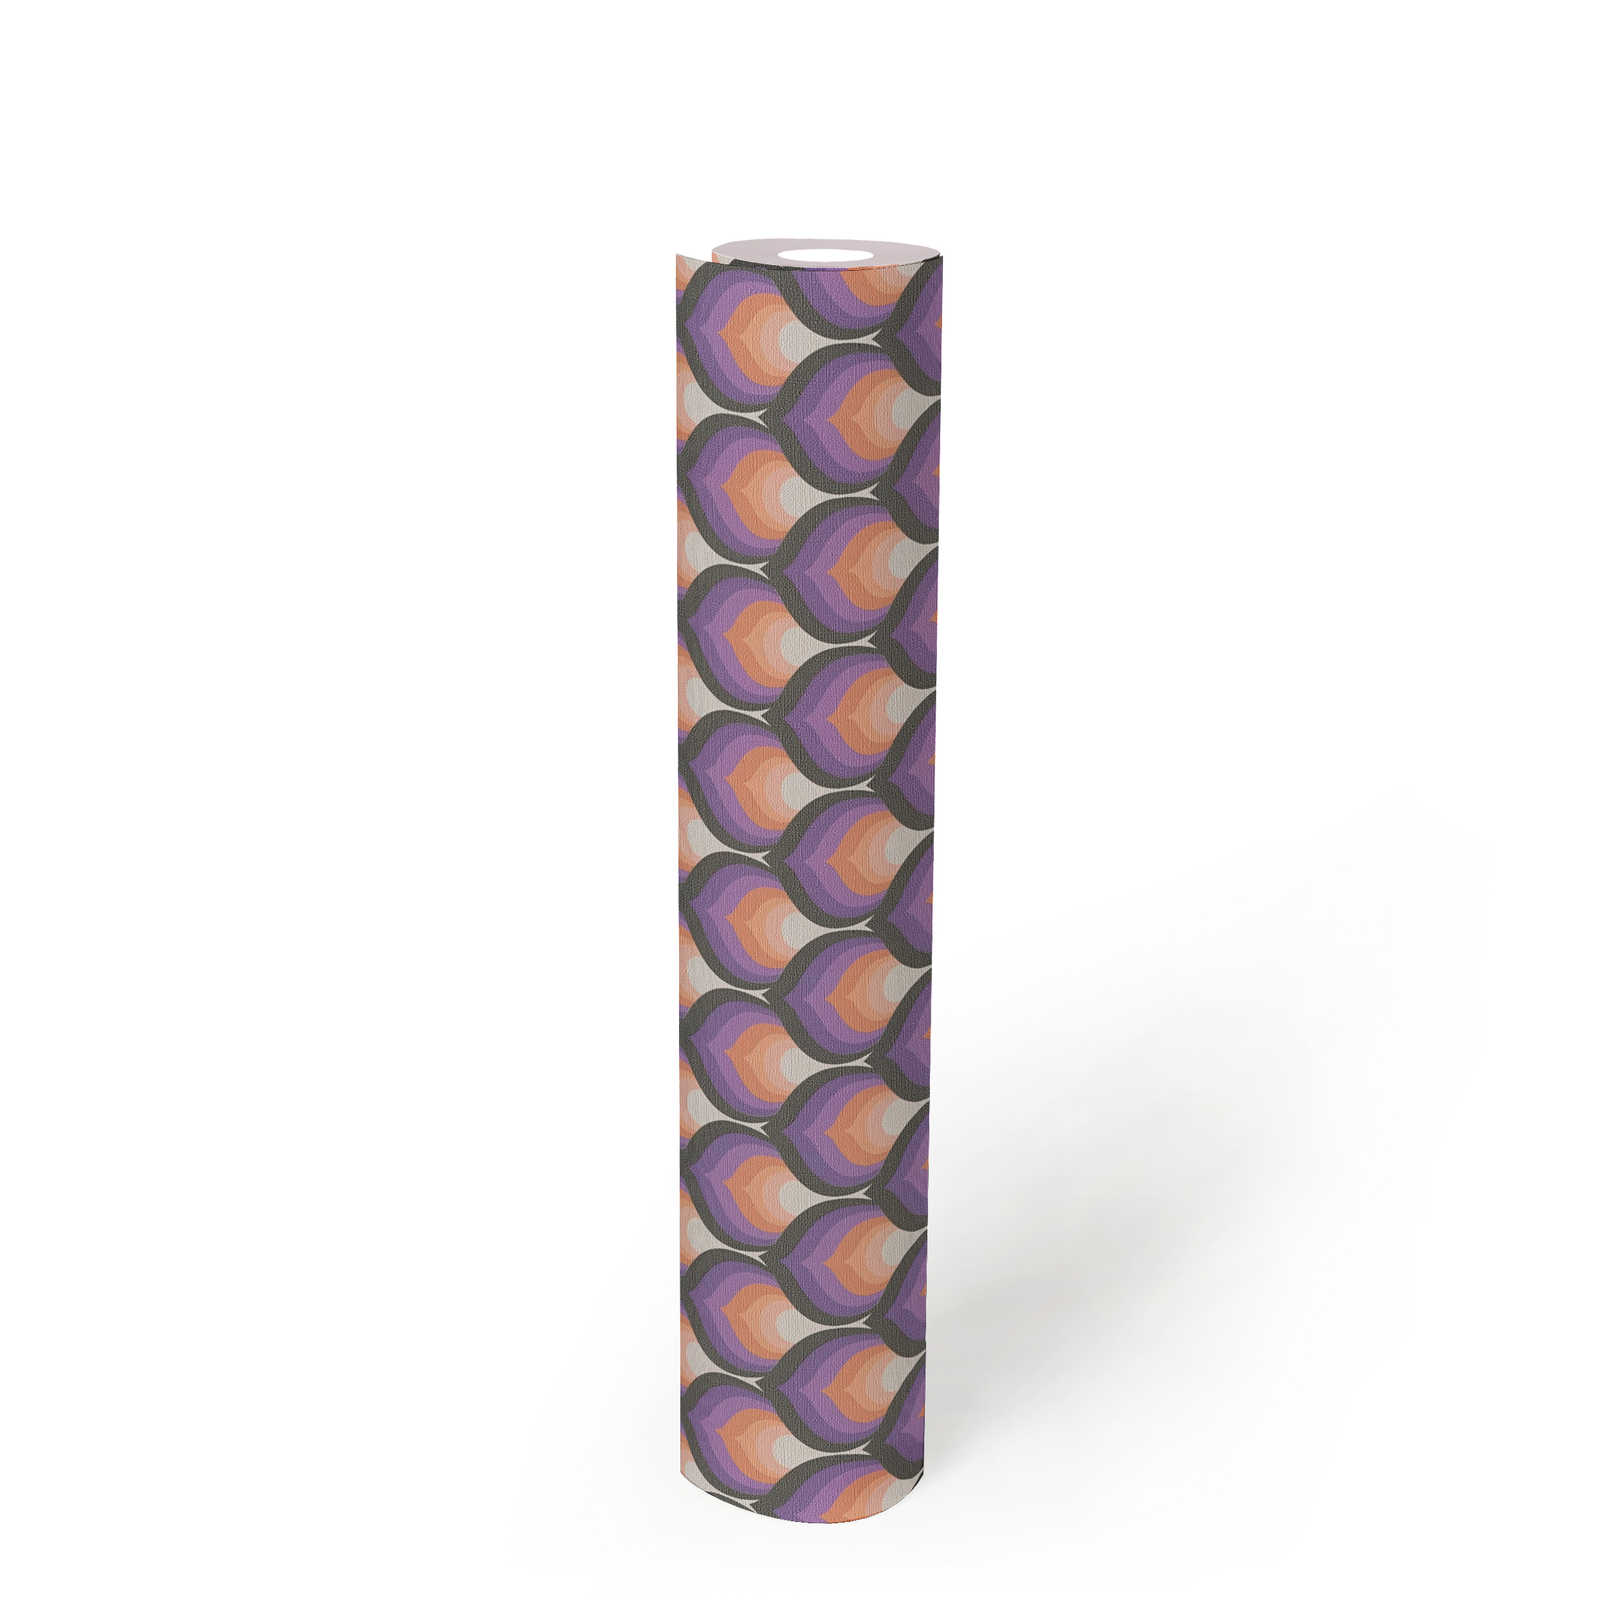             Retro style wallpaper with abstract scale pattern - orange, black, purple
        